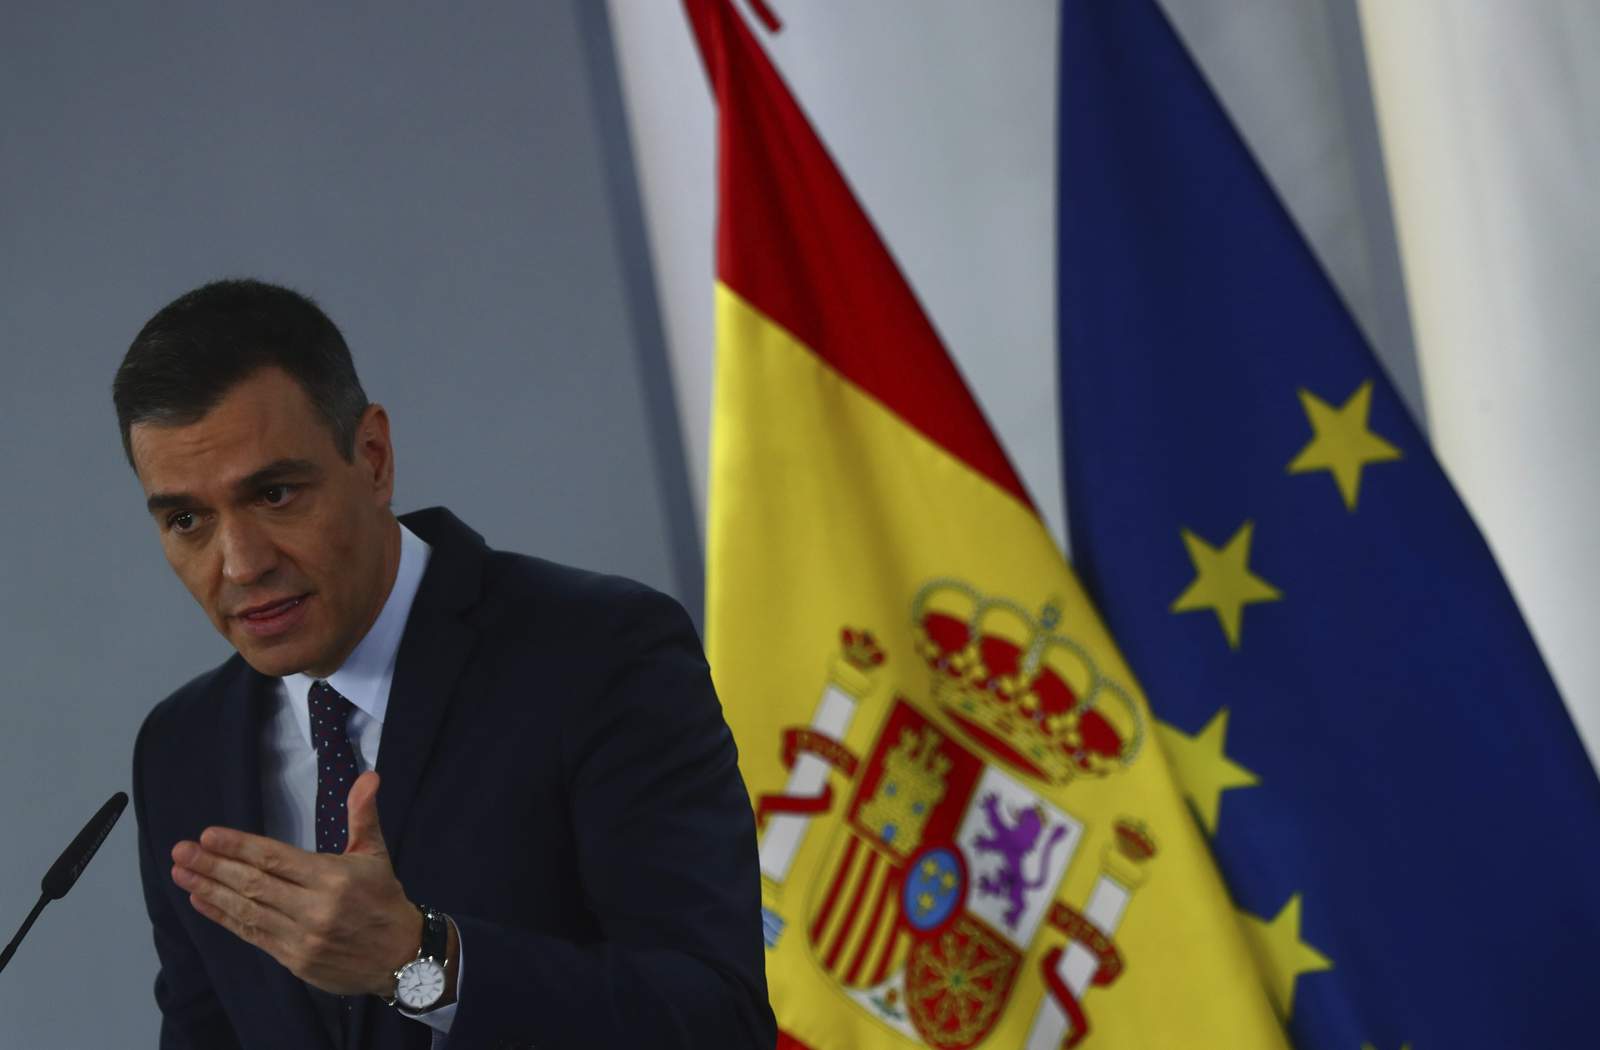 Spain's PM wants EU recovery funds to create greener nation